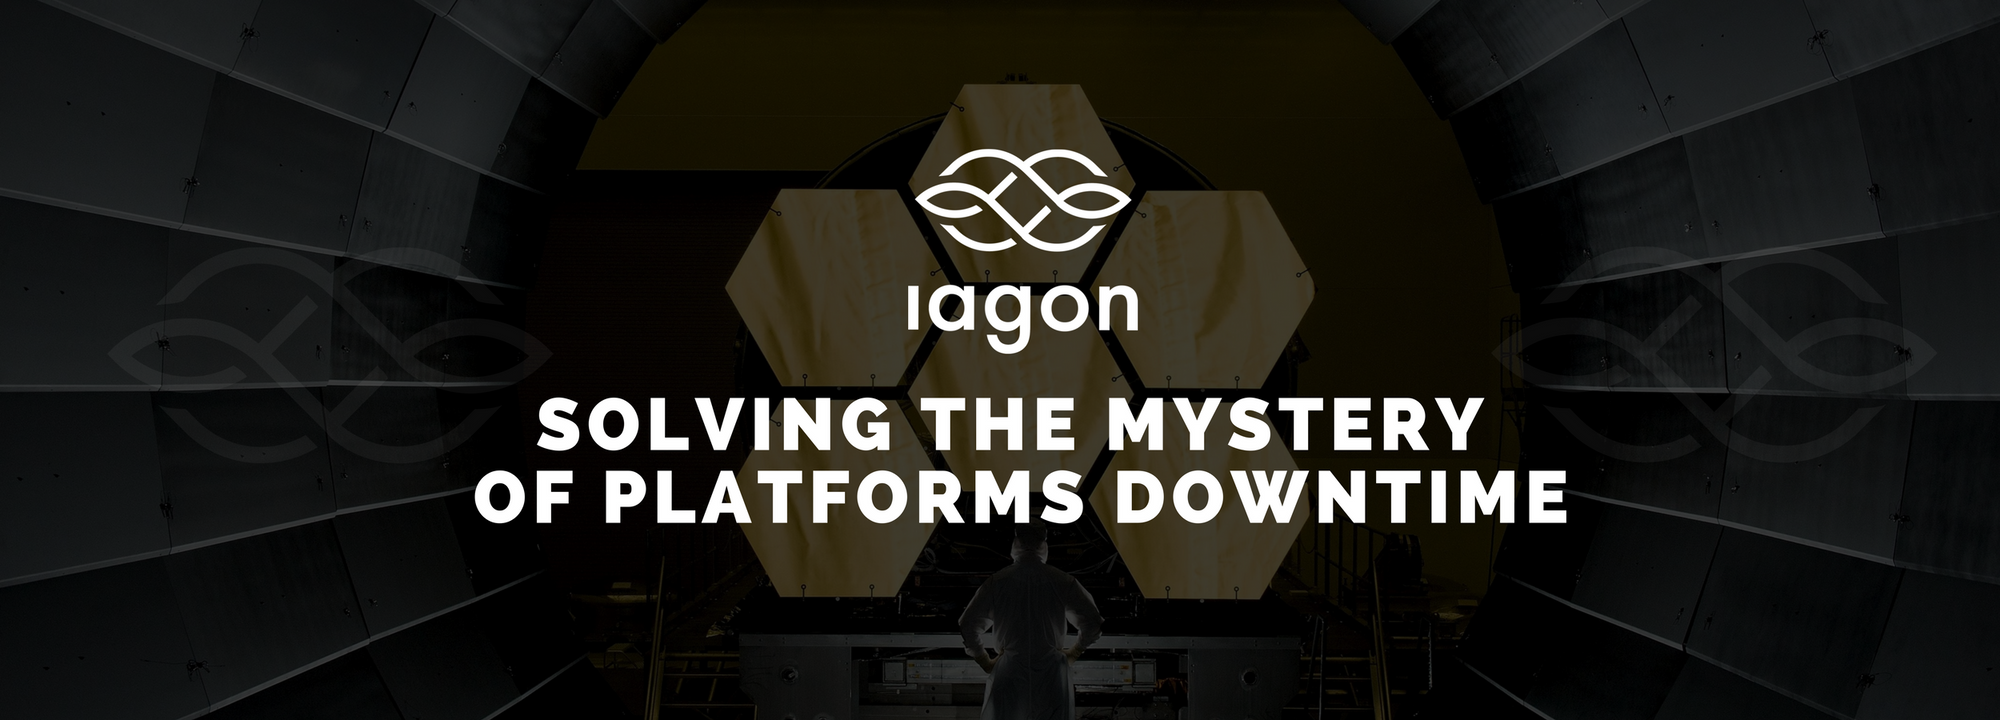 IAGON: solving the mystery of platforms downtime